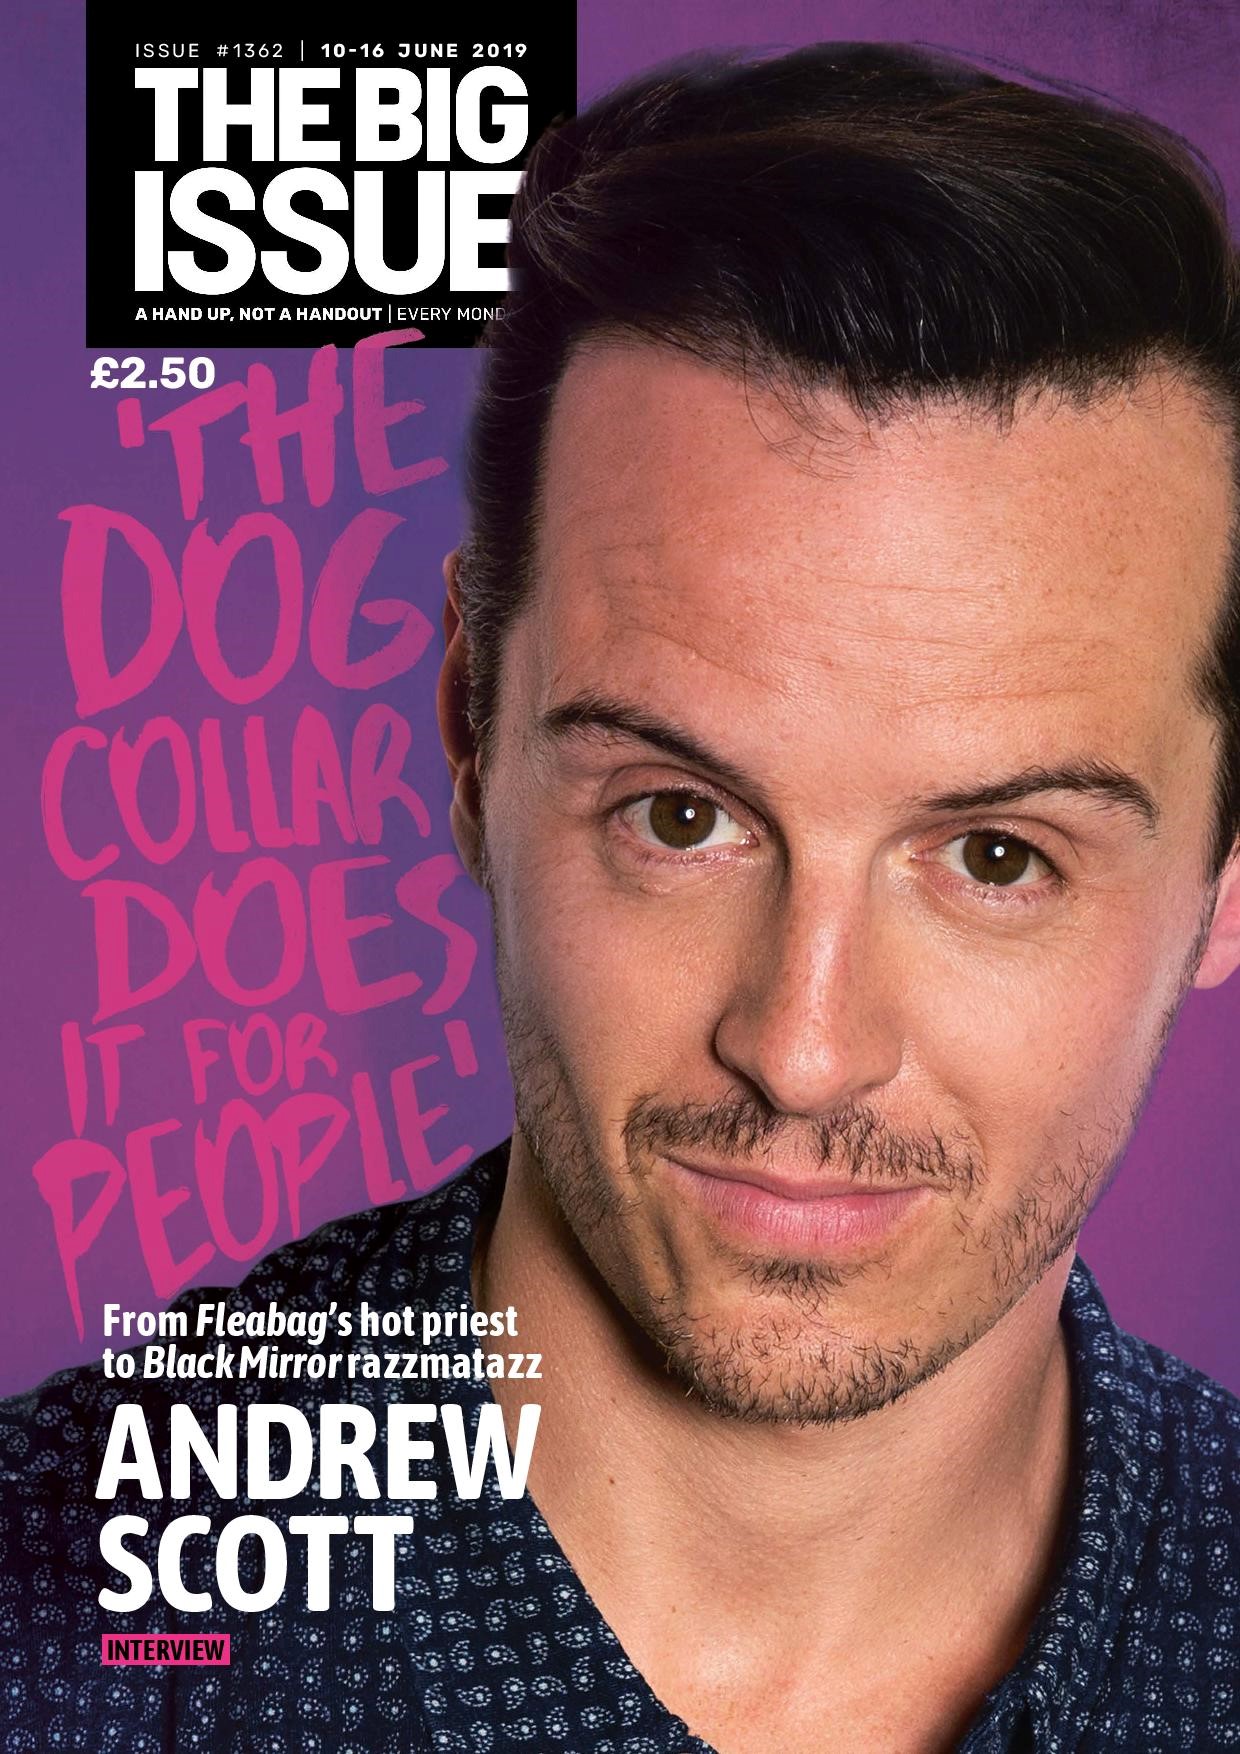 Andrew Scott on the cover of The Big Issue 